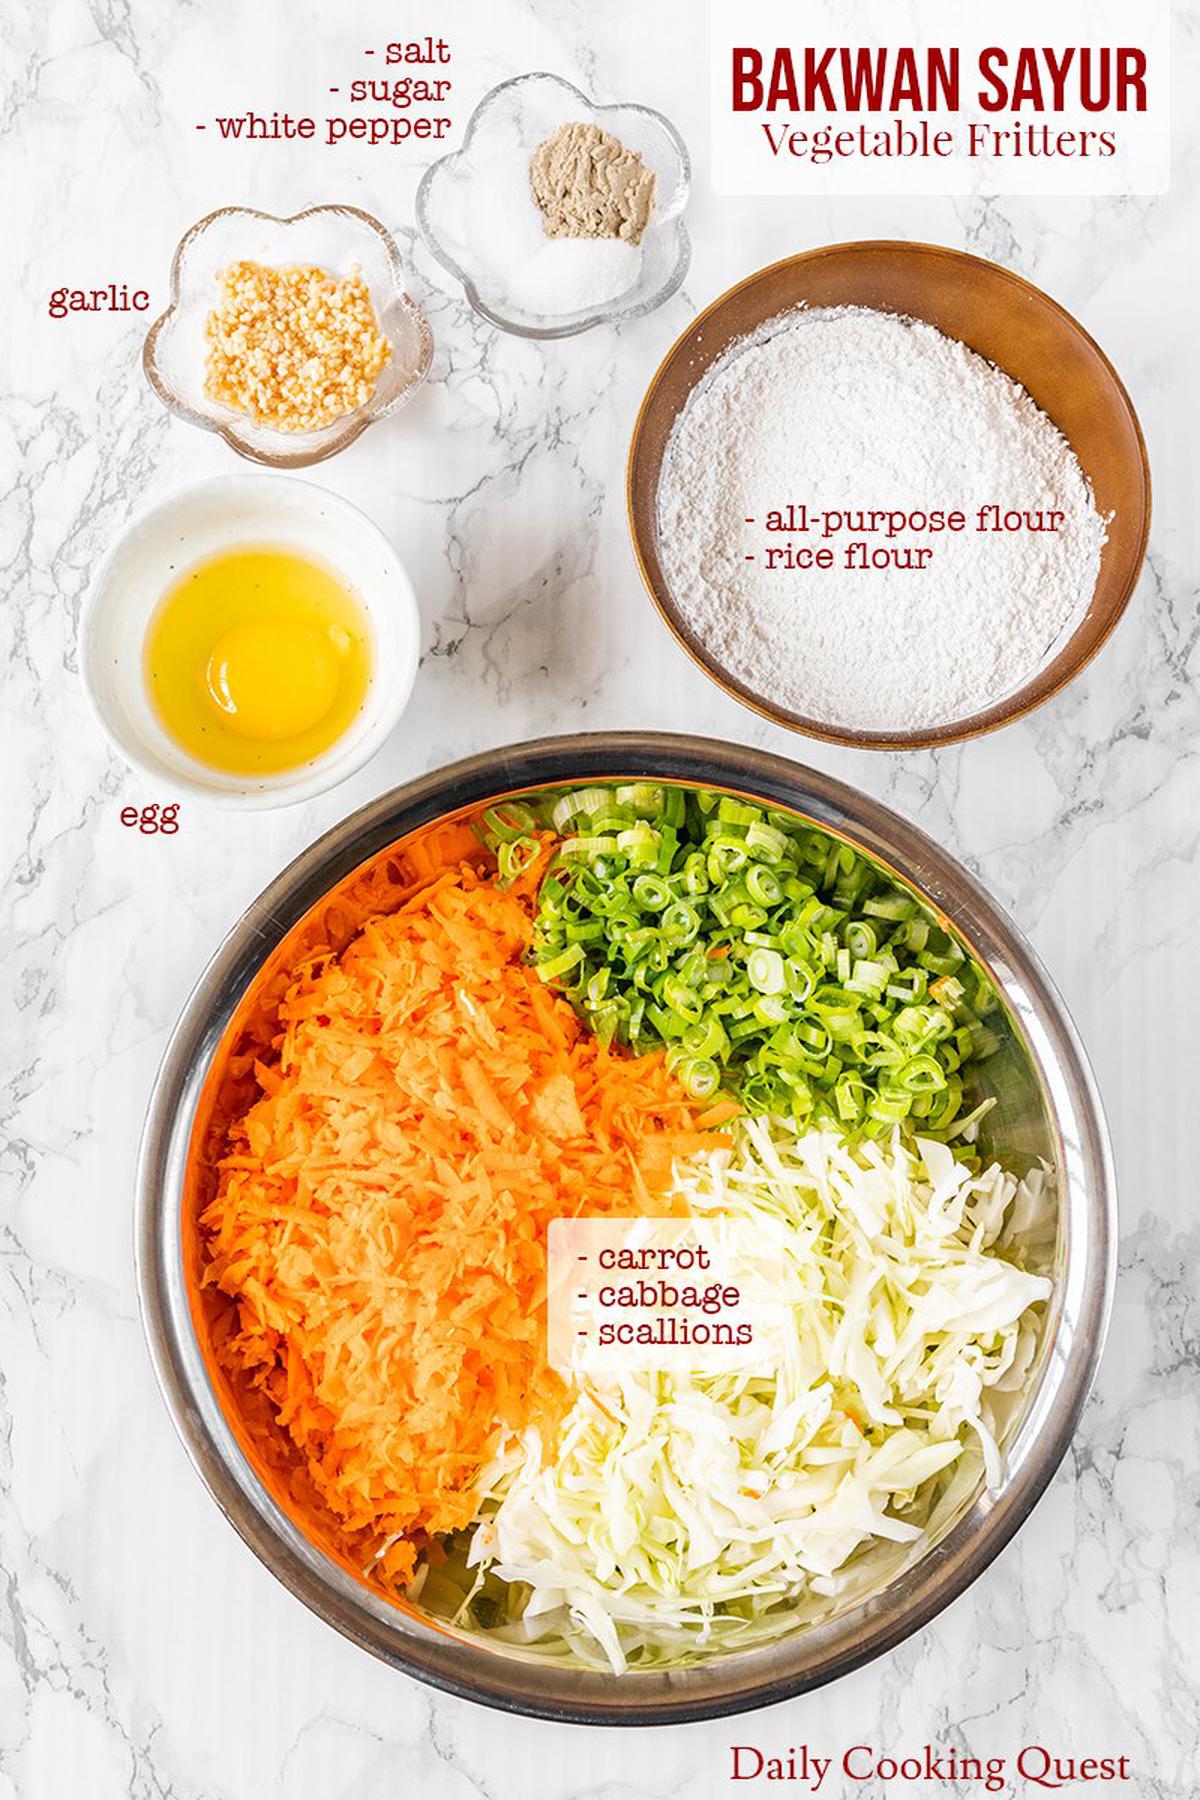 Ingredients for bakwan sayur (Indonesian vegetable fritters): carrot, cabbage, scallions, egg, all-purpose flour, rice flour, salt, sugar, and white pepper.